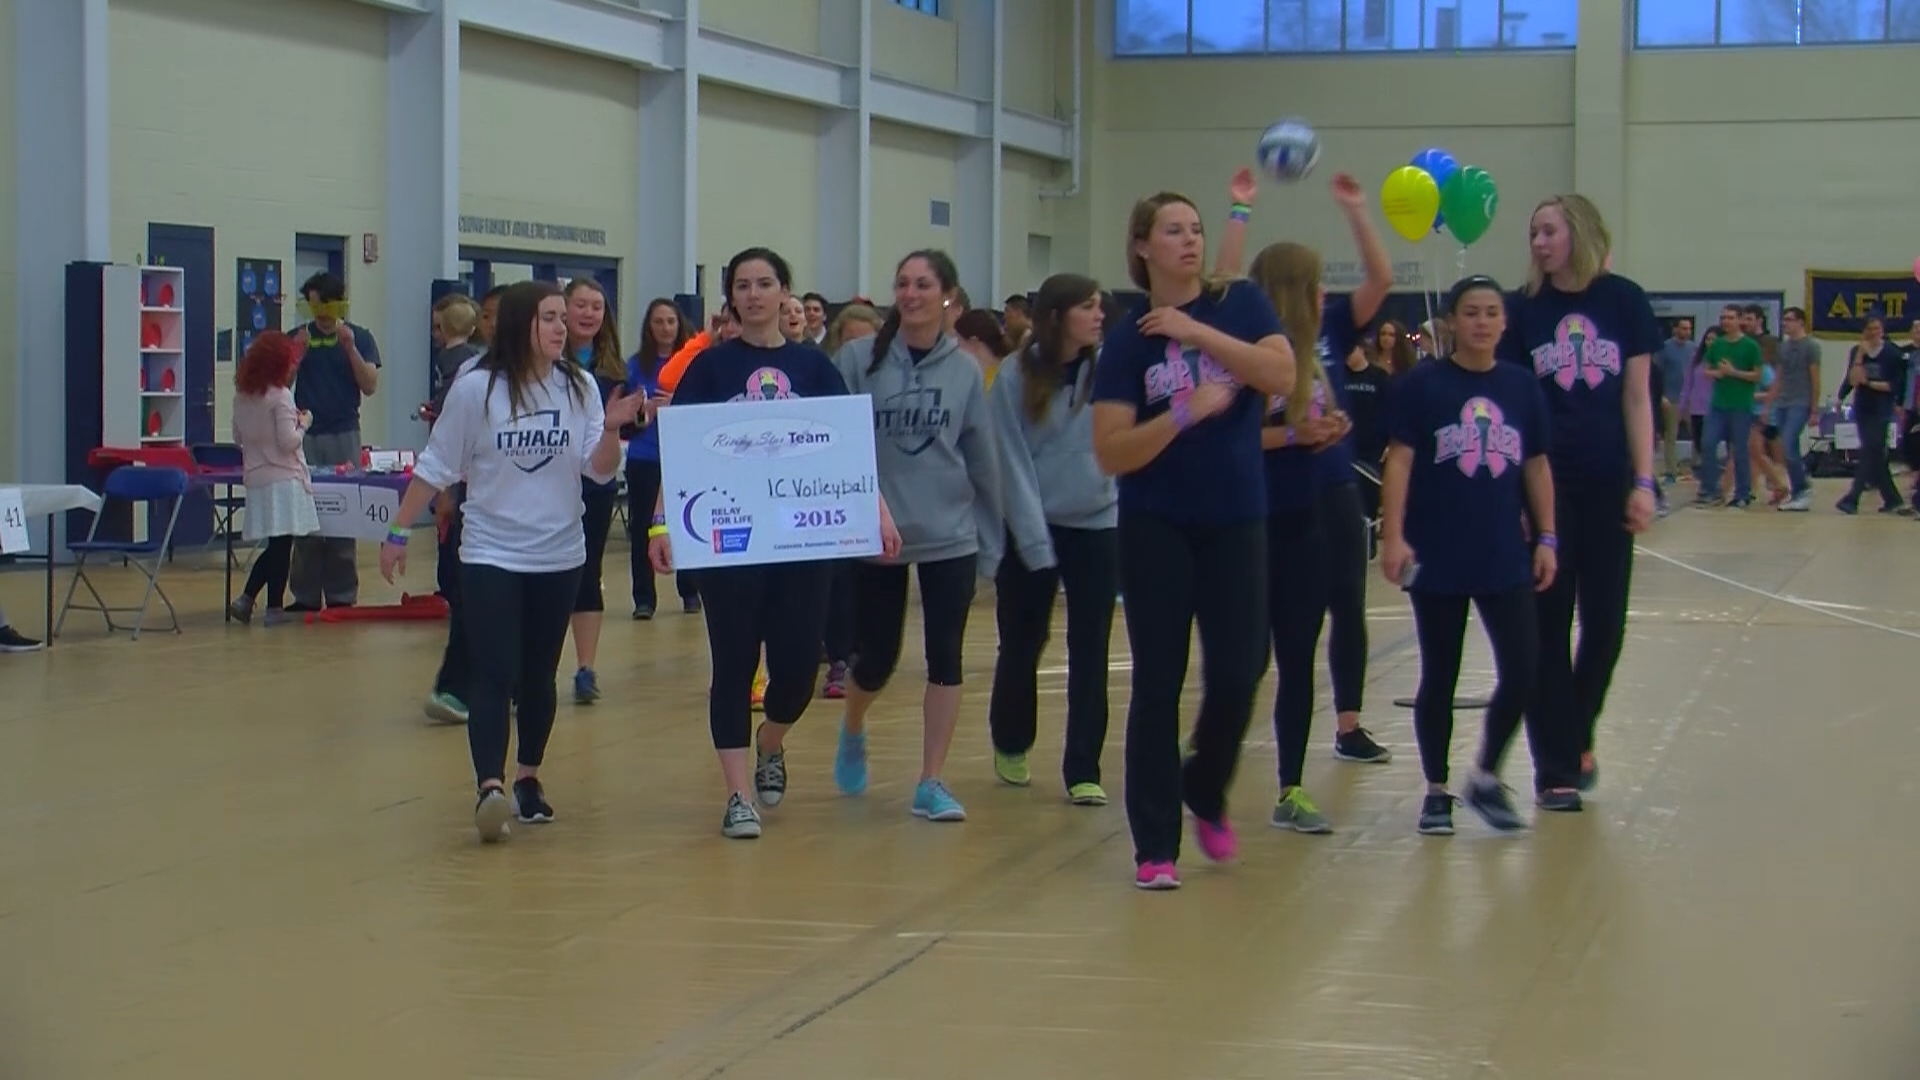 Ithaca College students participate in Relay for Life